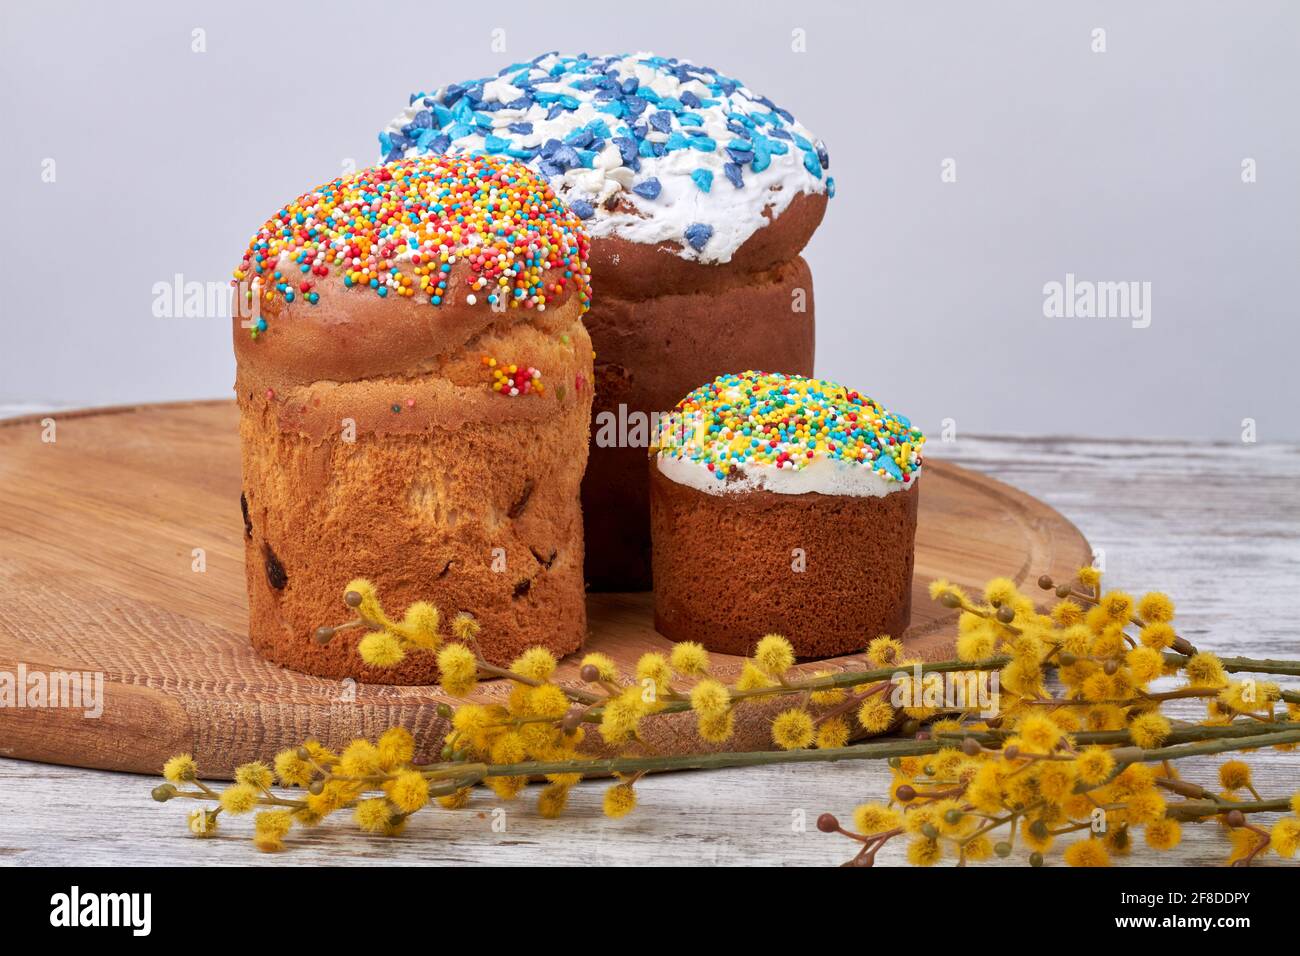 Baked easter cakes with icing and yellow willow. Stock Photo